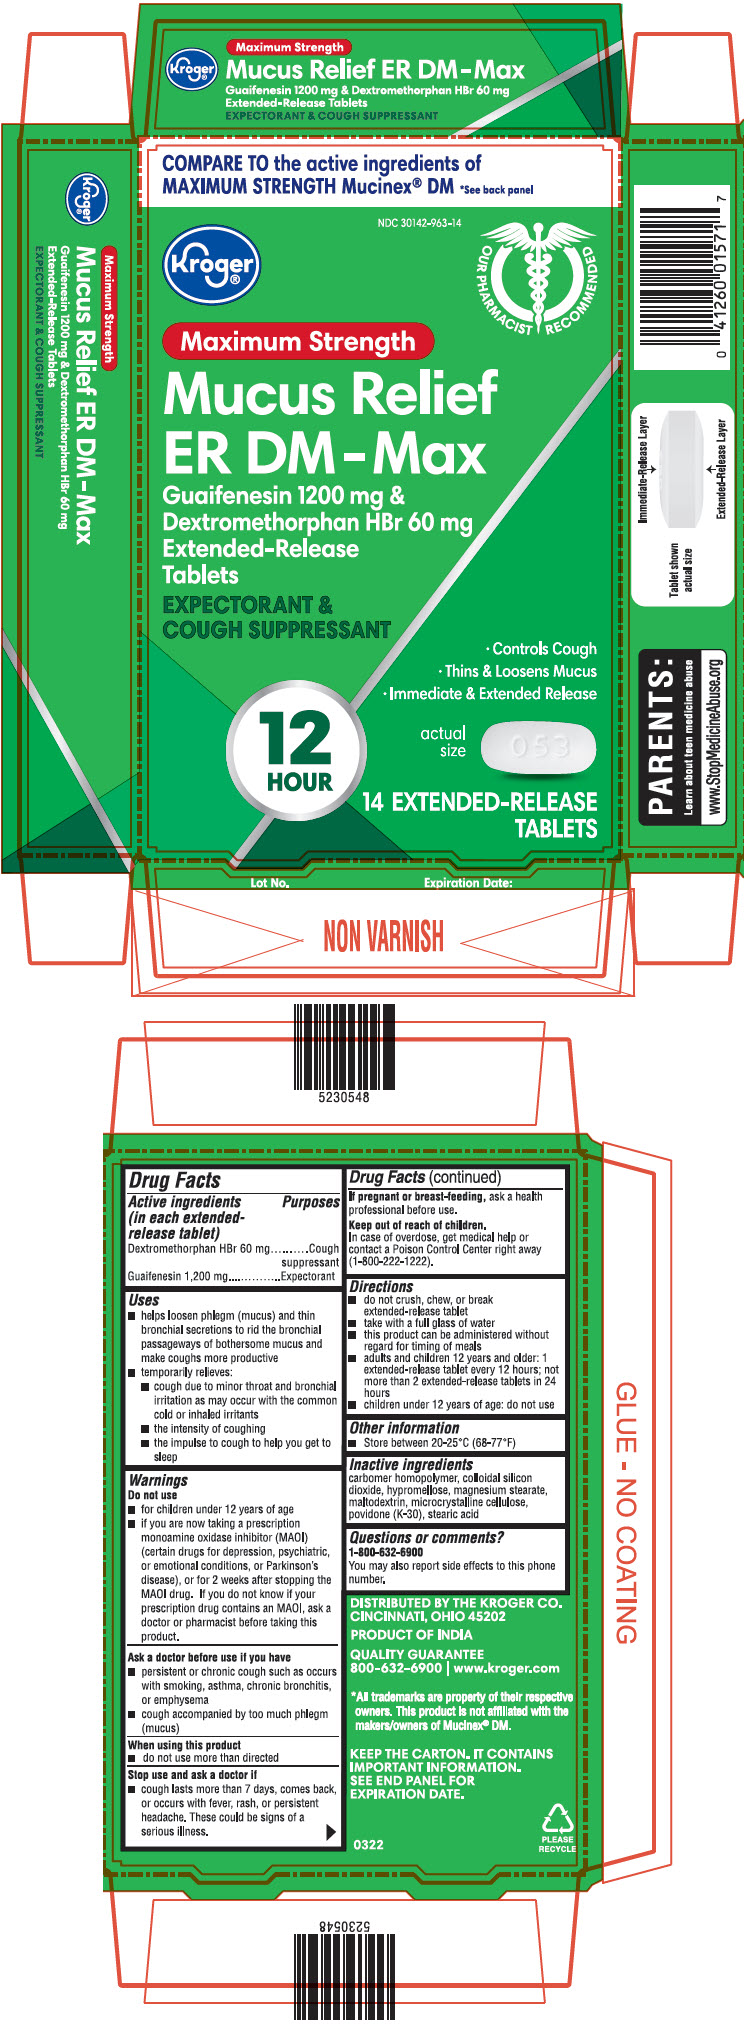 PRINCIPAL DISPLAY PANEL - 14 Extended-Release Tablet Blister Pack Carton